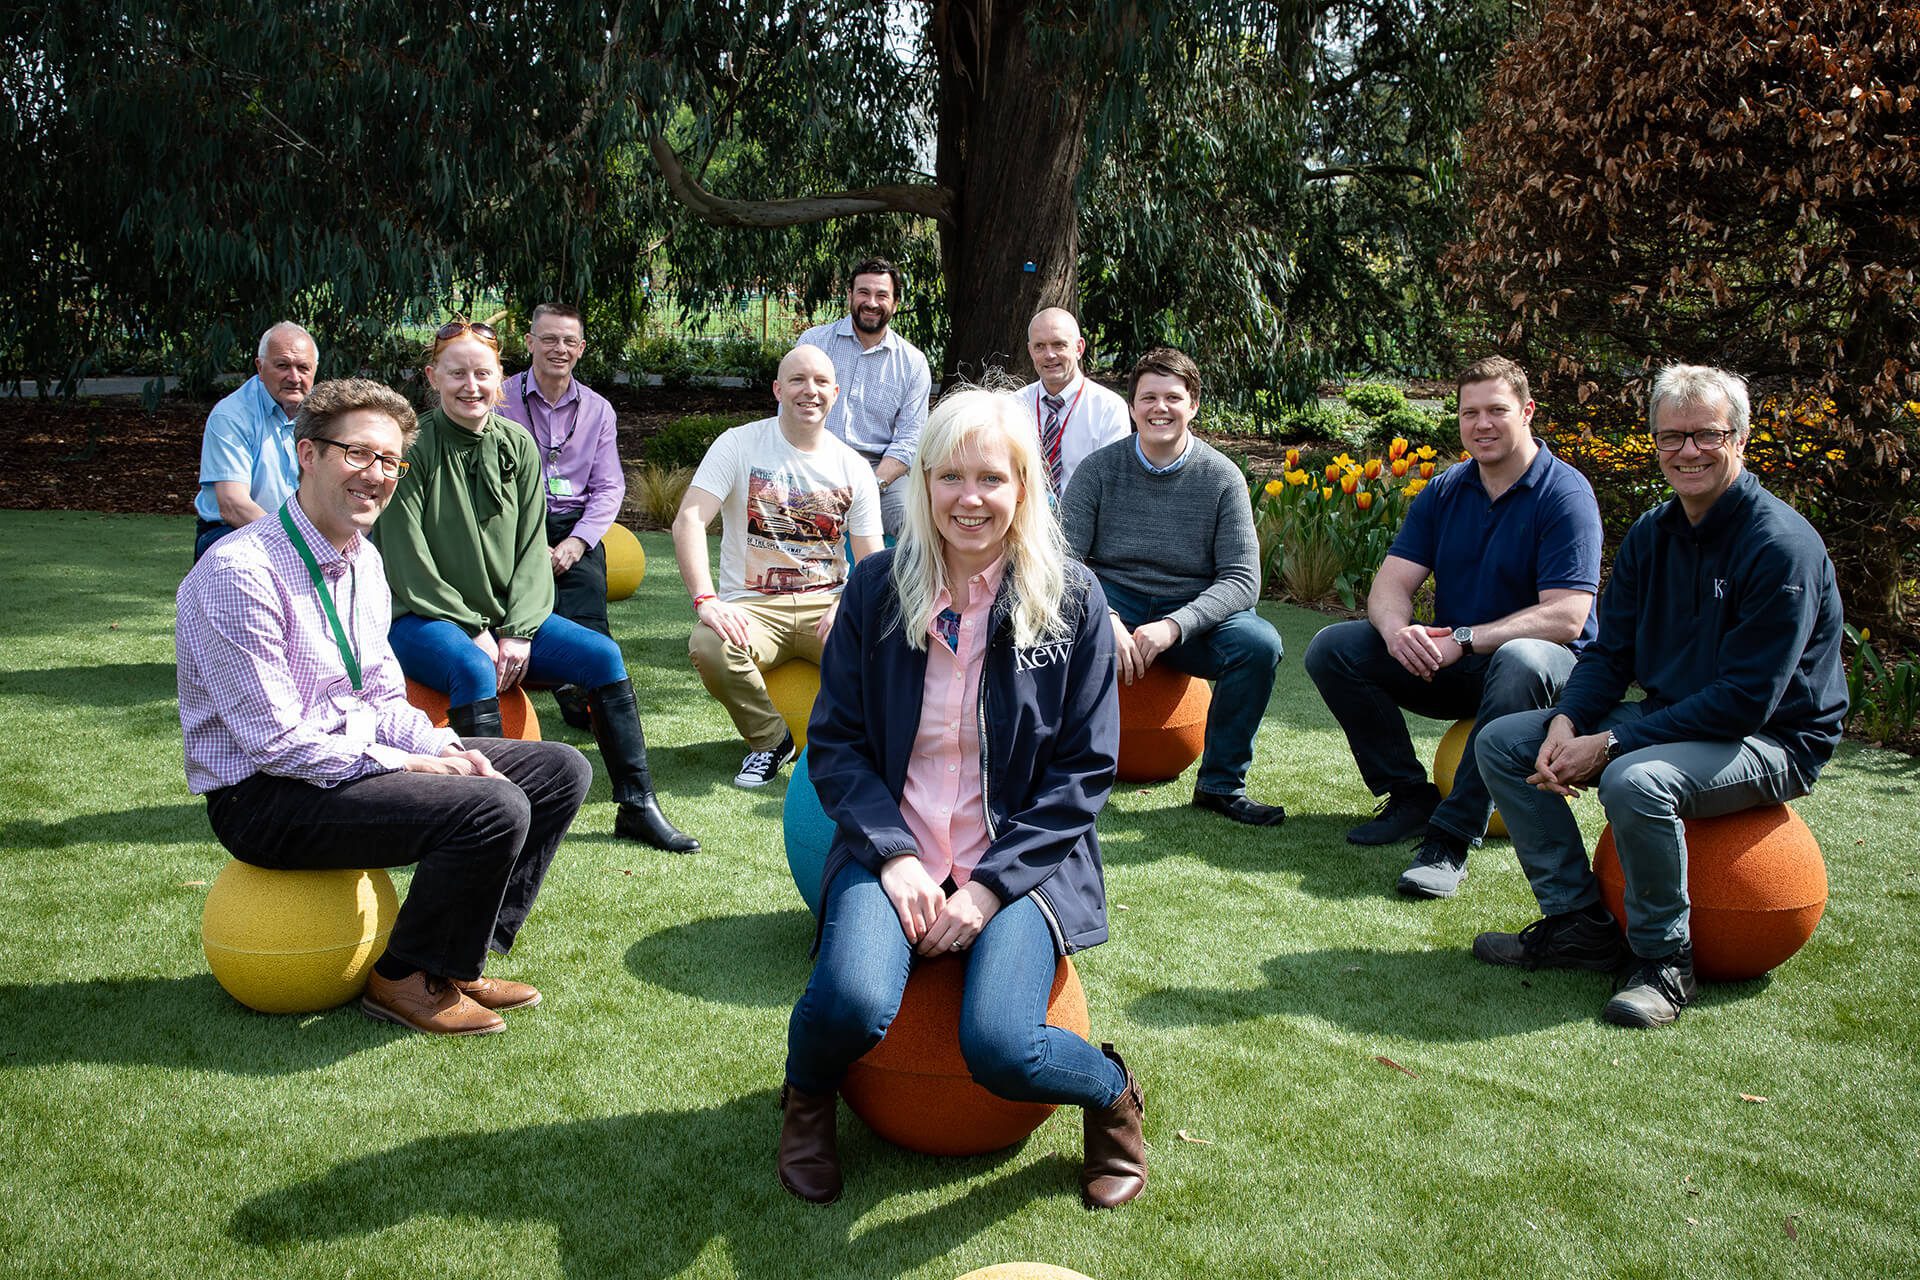 A group photograph of the designers of the childrens garden in Kew gardens.